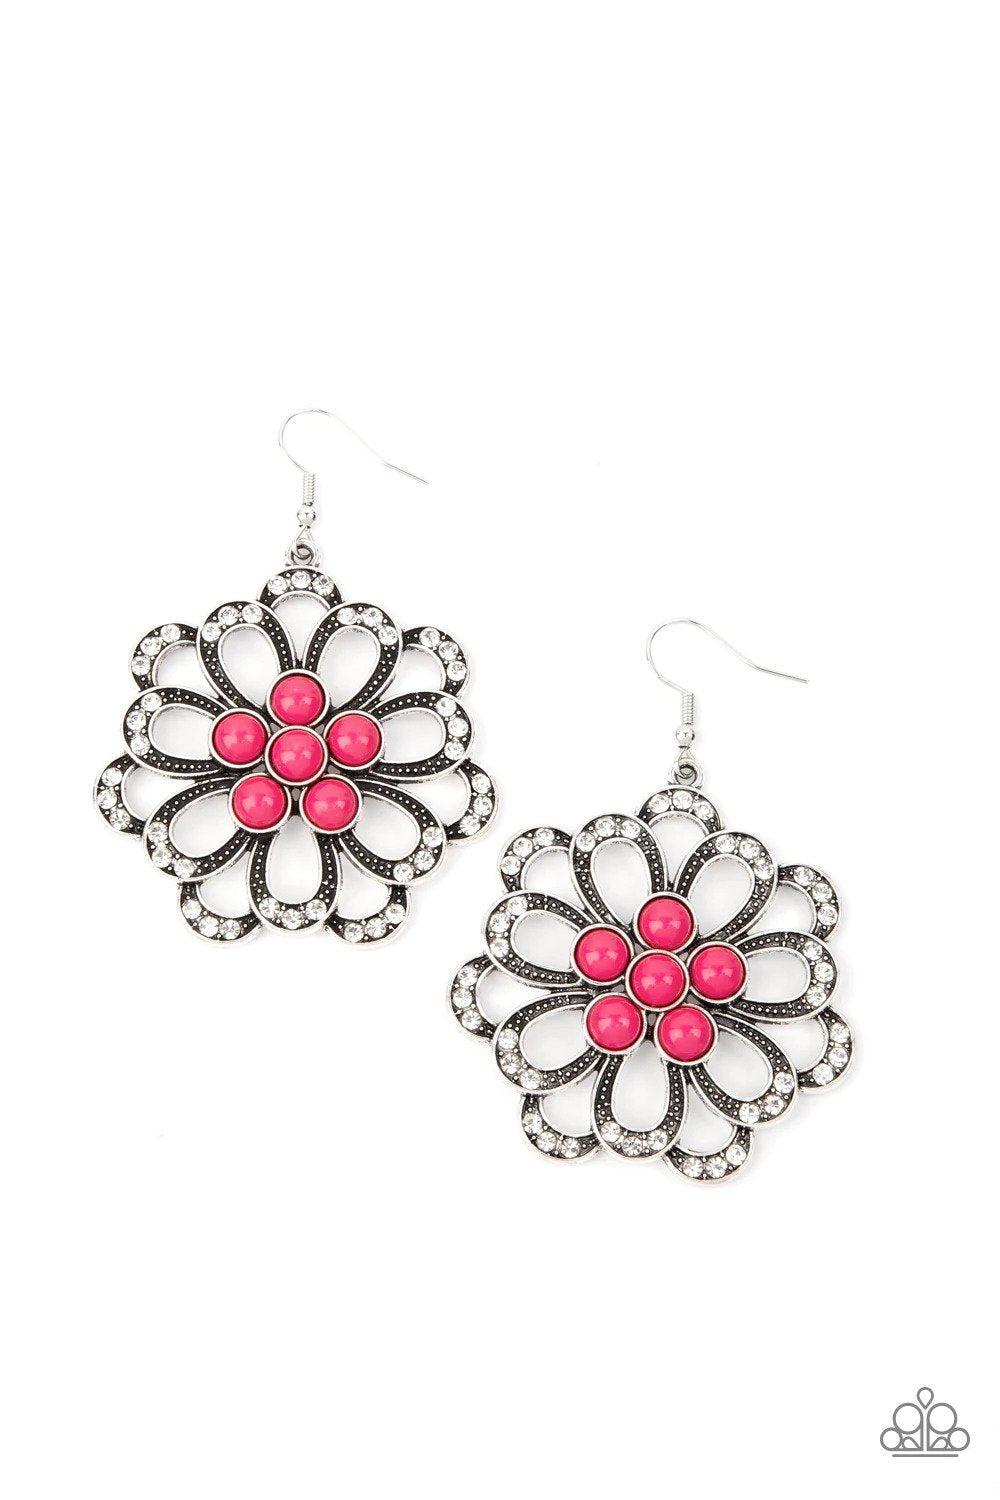 Dazzling Dewdrops Pink Earrings - Paparazzi Accessories- lightbox - CarasShop.com - $5 Jewelry by Cara Jewels